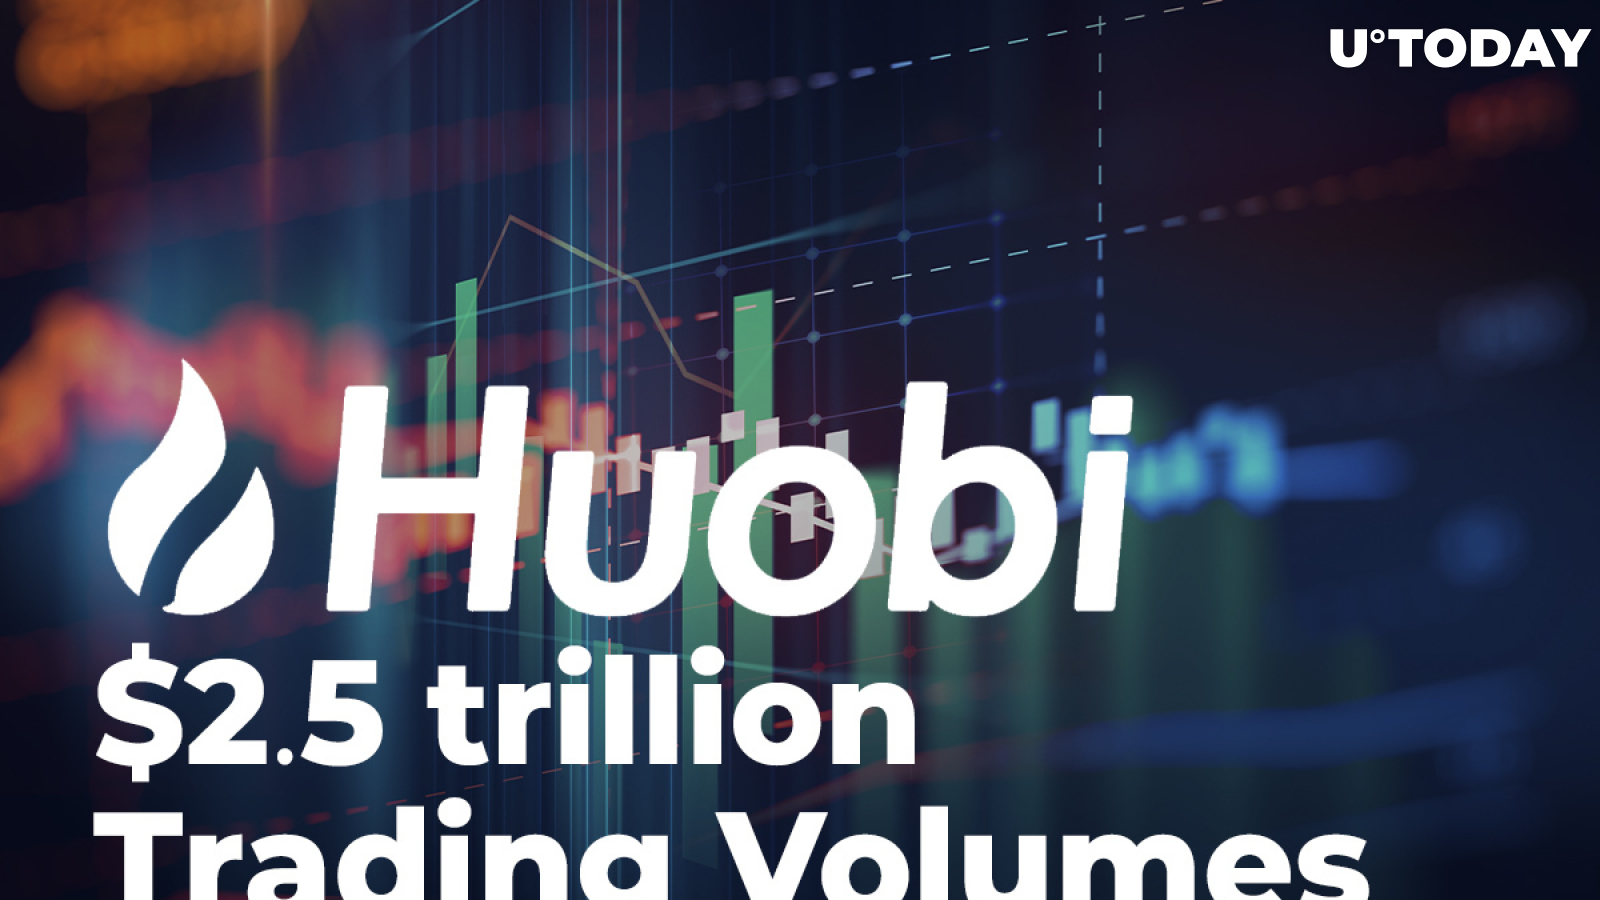 Huobi Futures Reveals $2.597 Trillion Trading Volume on Its Two-Year Anniversary, Exceeding Rivals